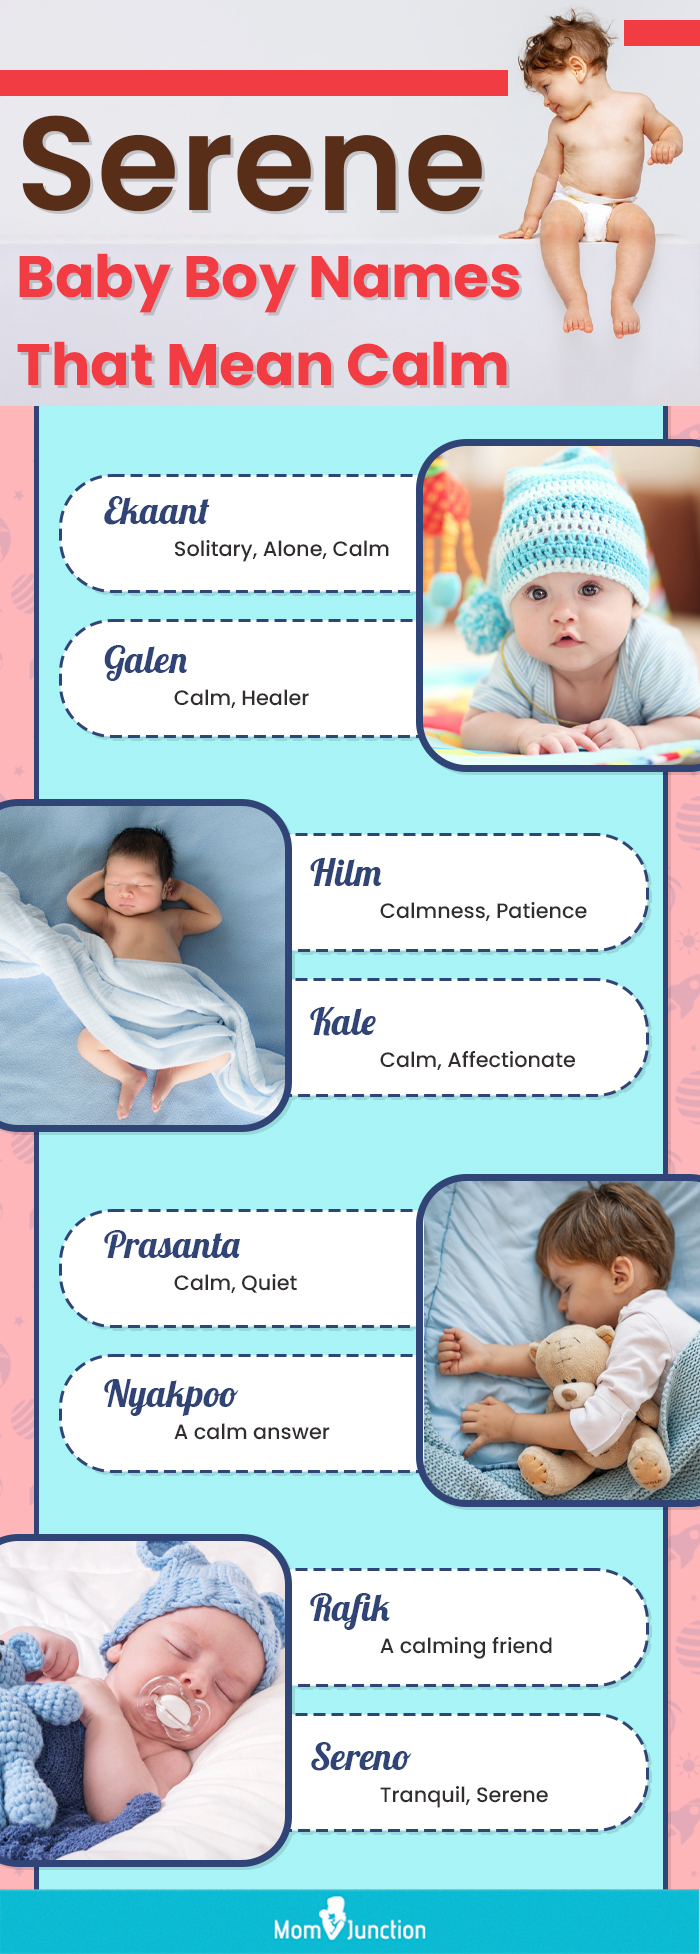 serene baby boy names that mean calm (infographic)